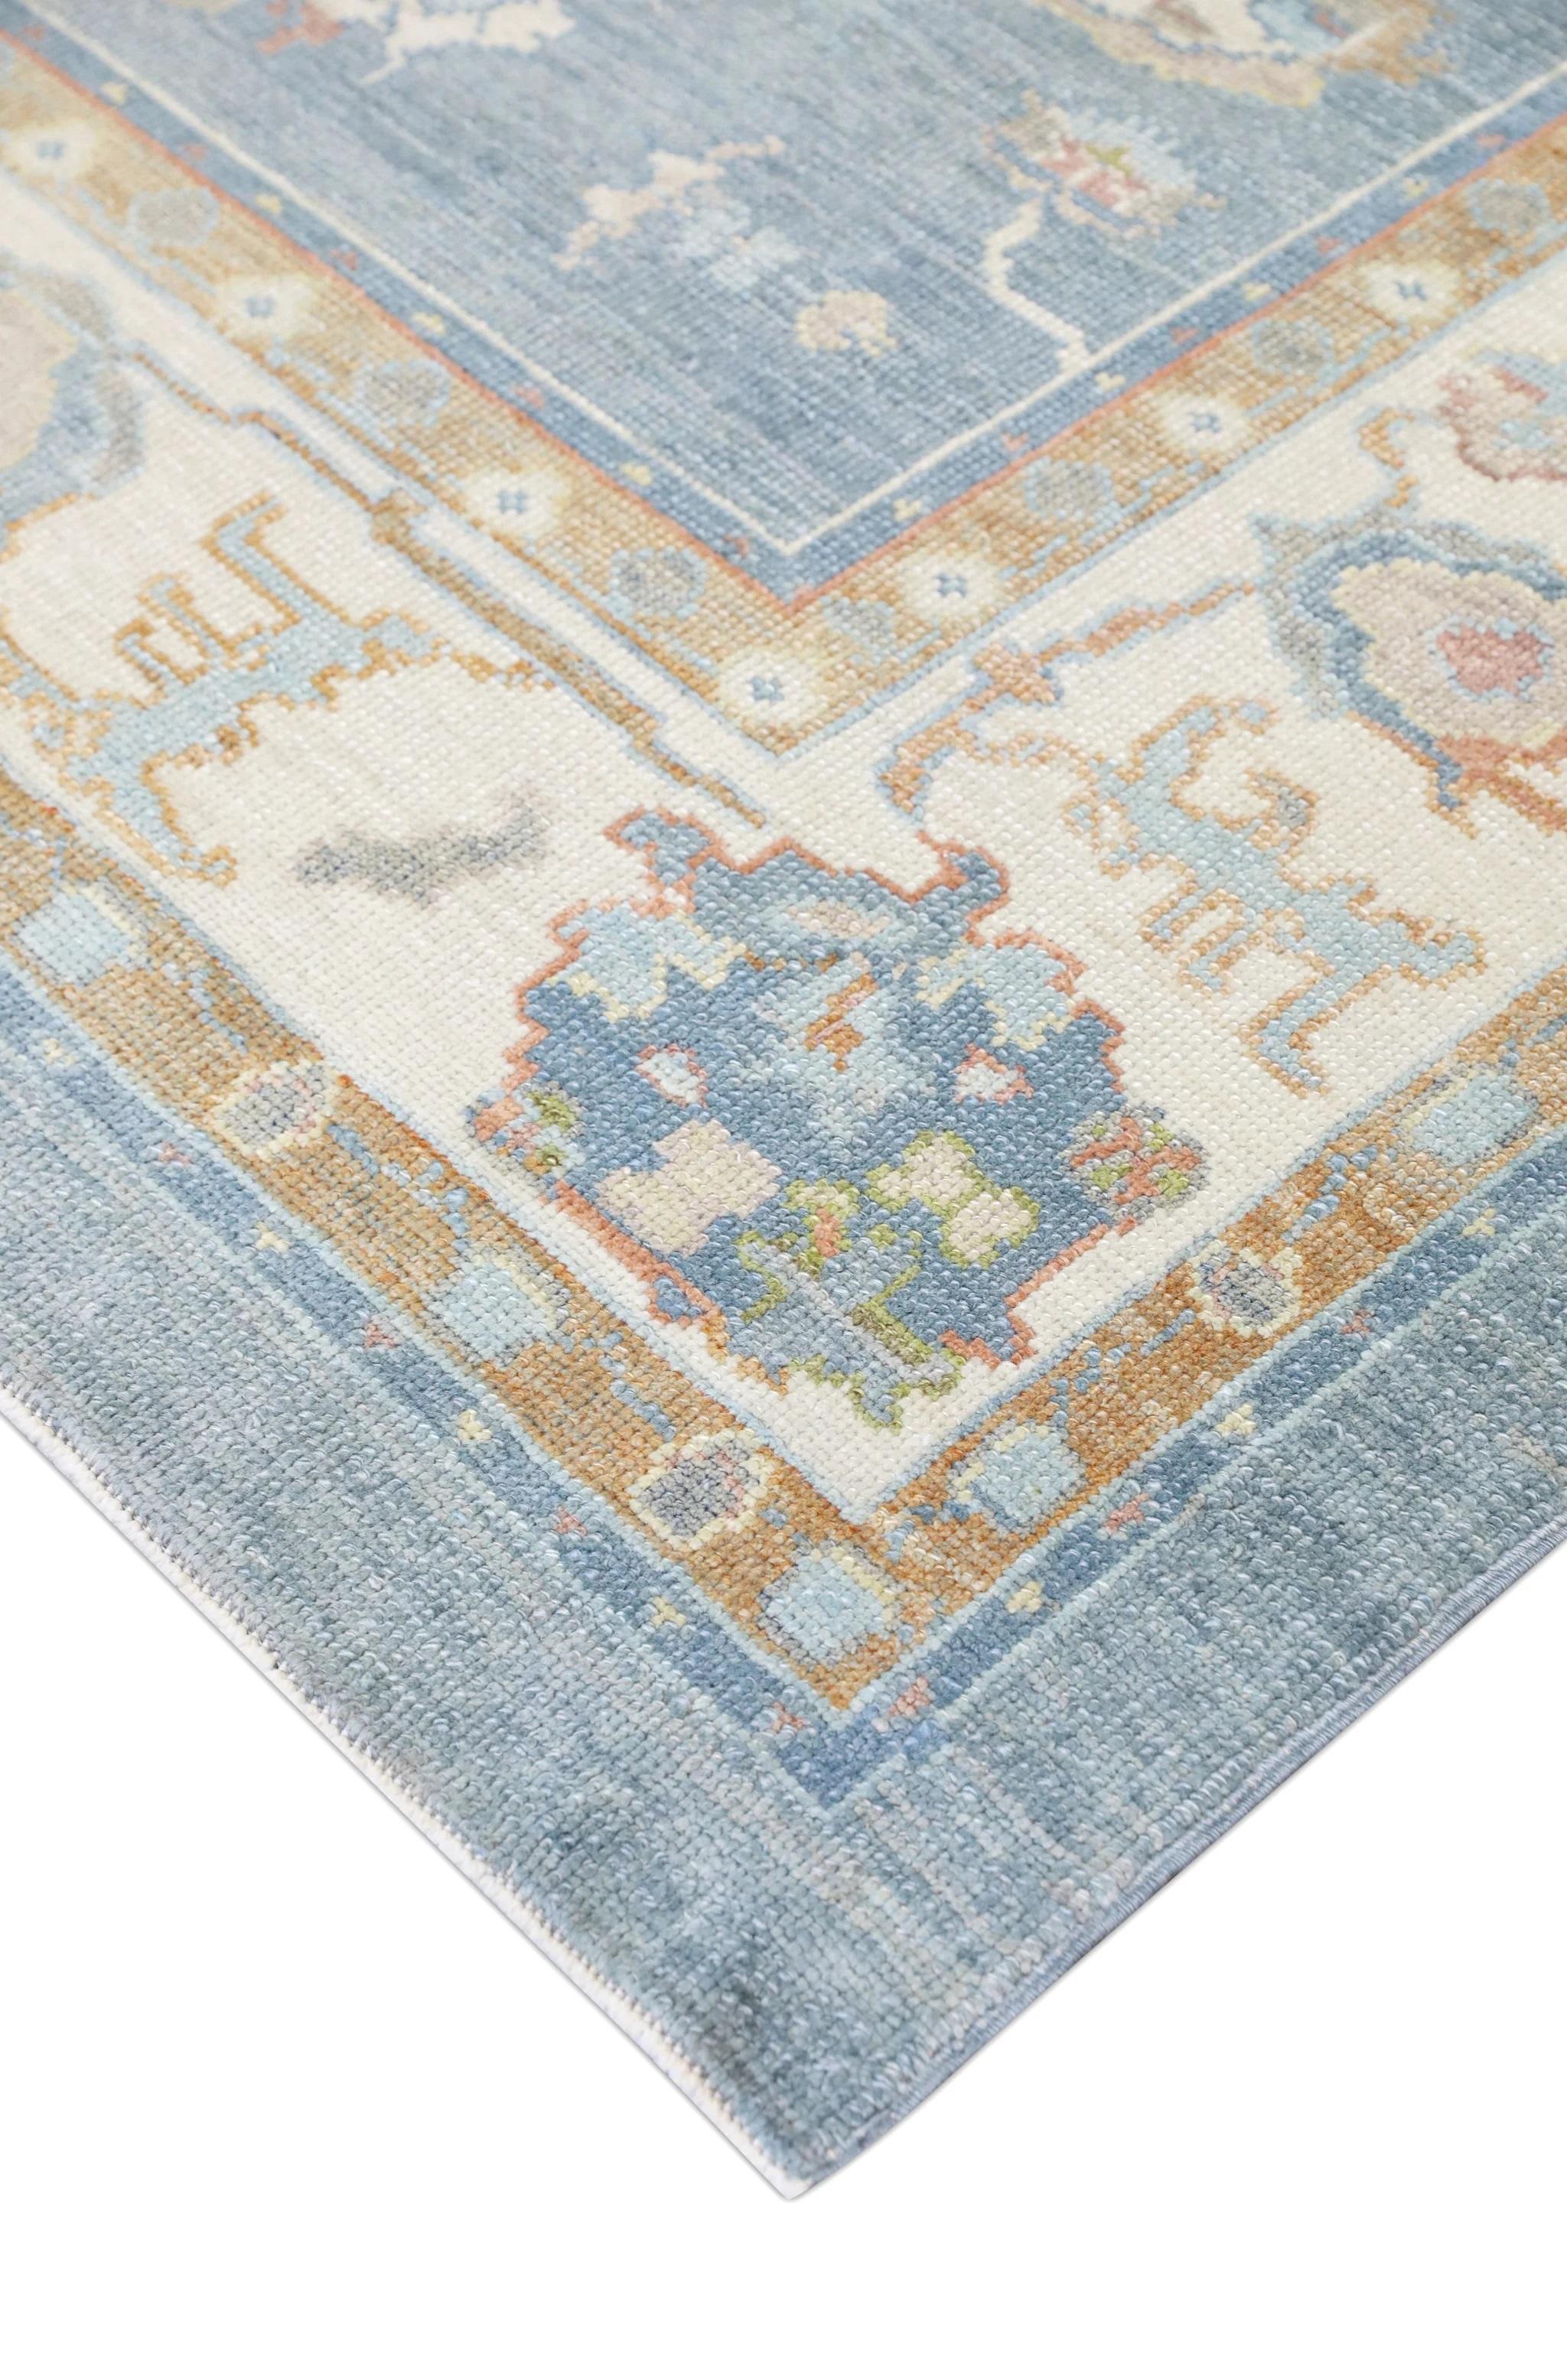 Blue Floral Design Turkish Oushak Rug Made with Handwoven Wool 9'4